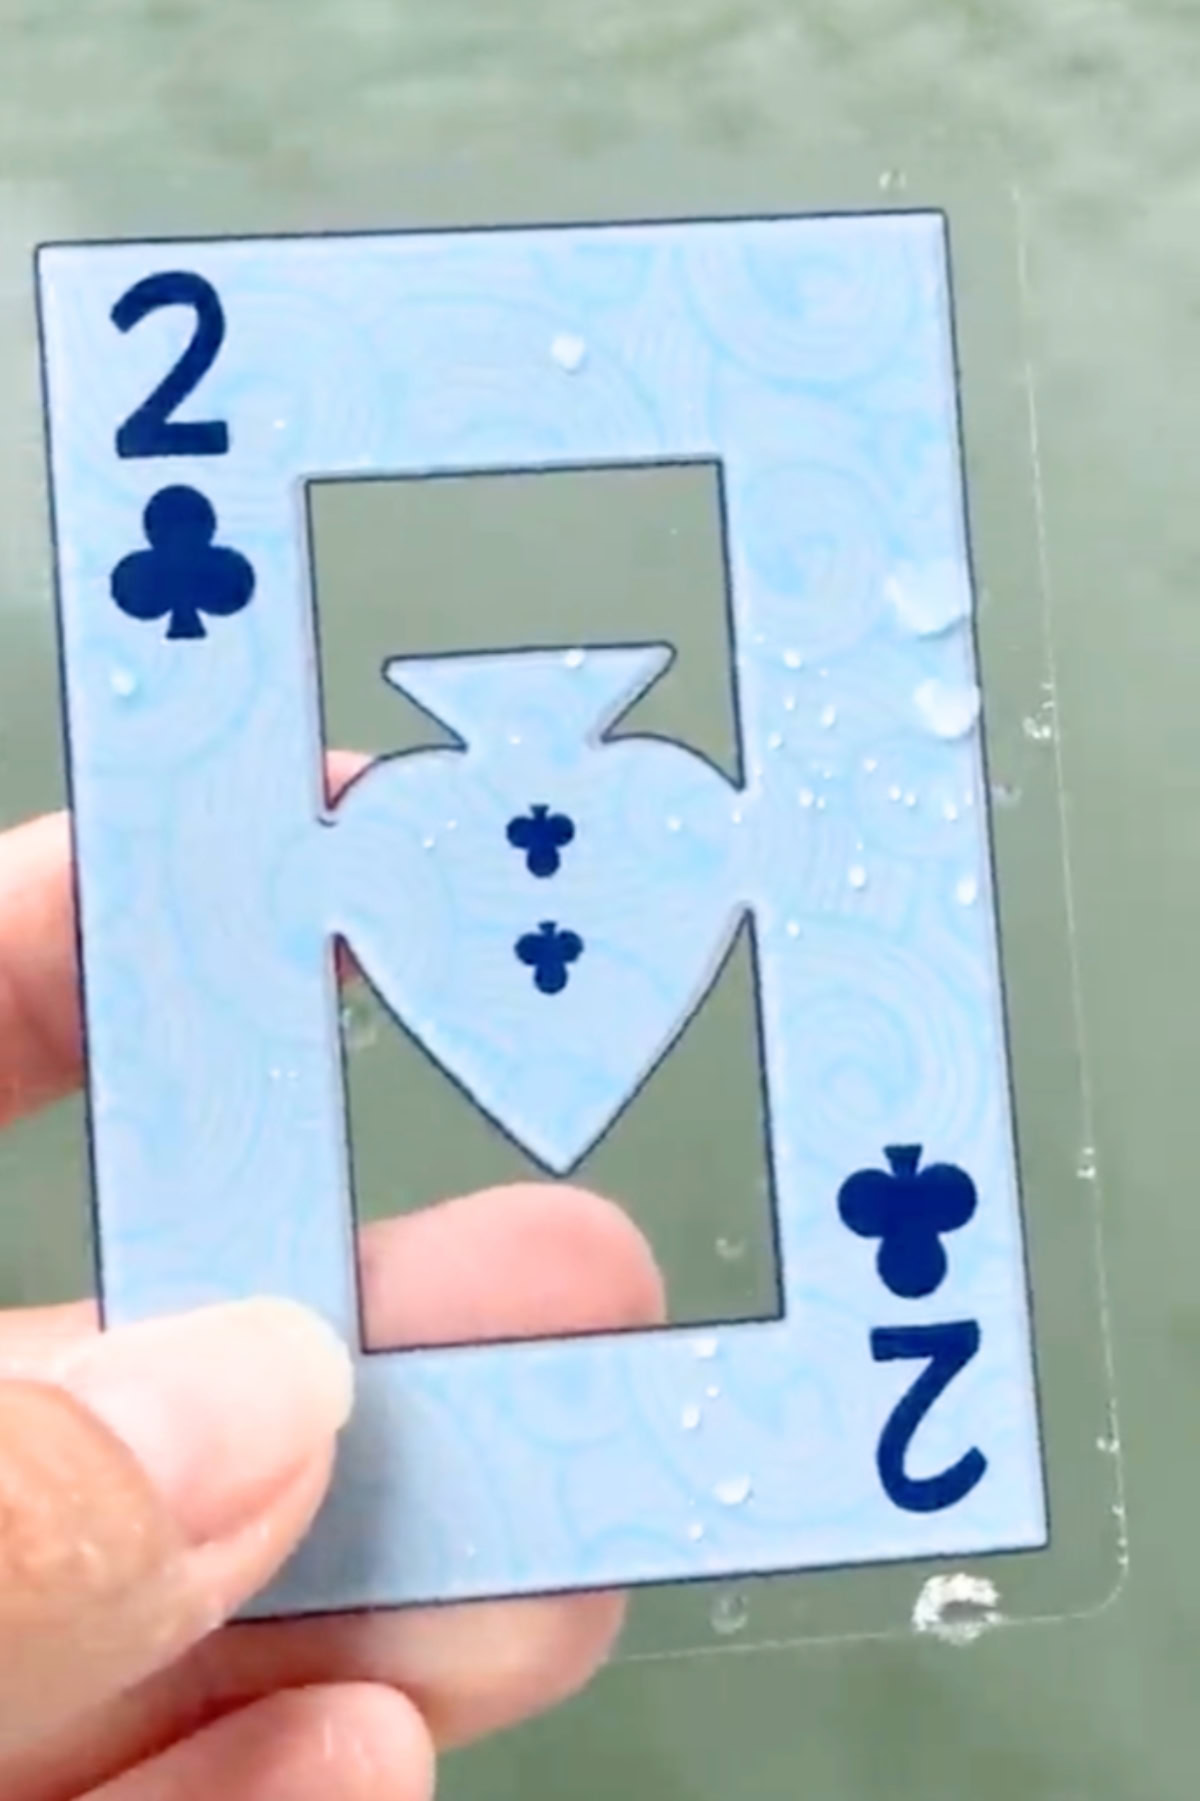 Hand holding a transparent playing card of 2 of clubs with a cutout design and water droplets on it.